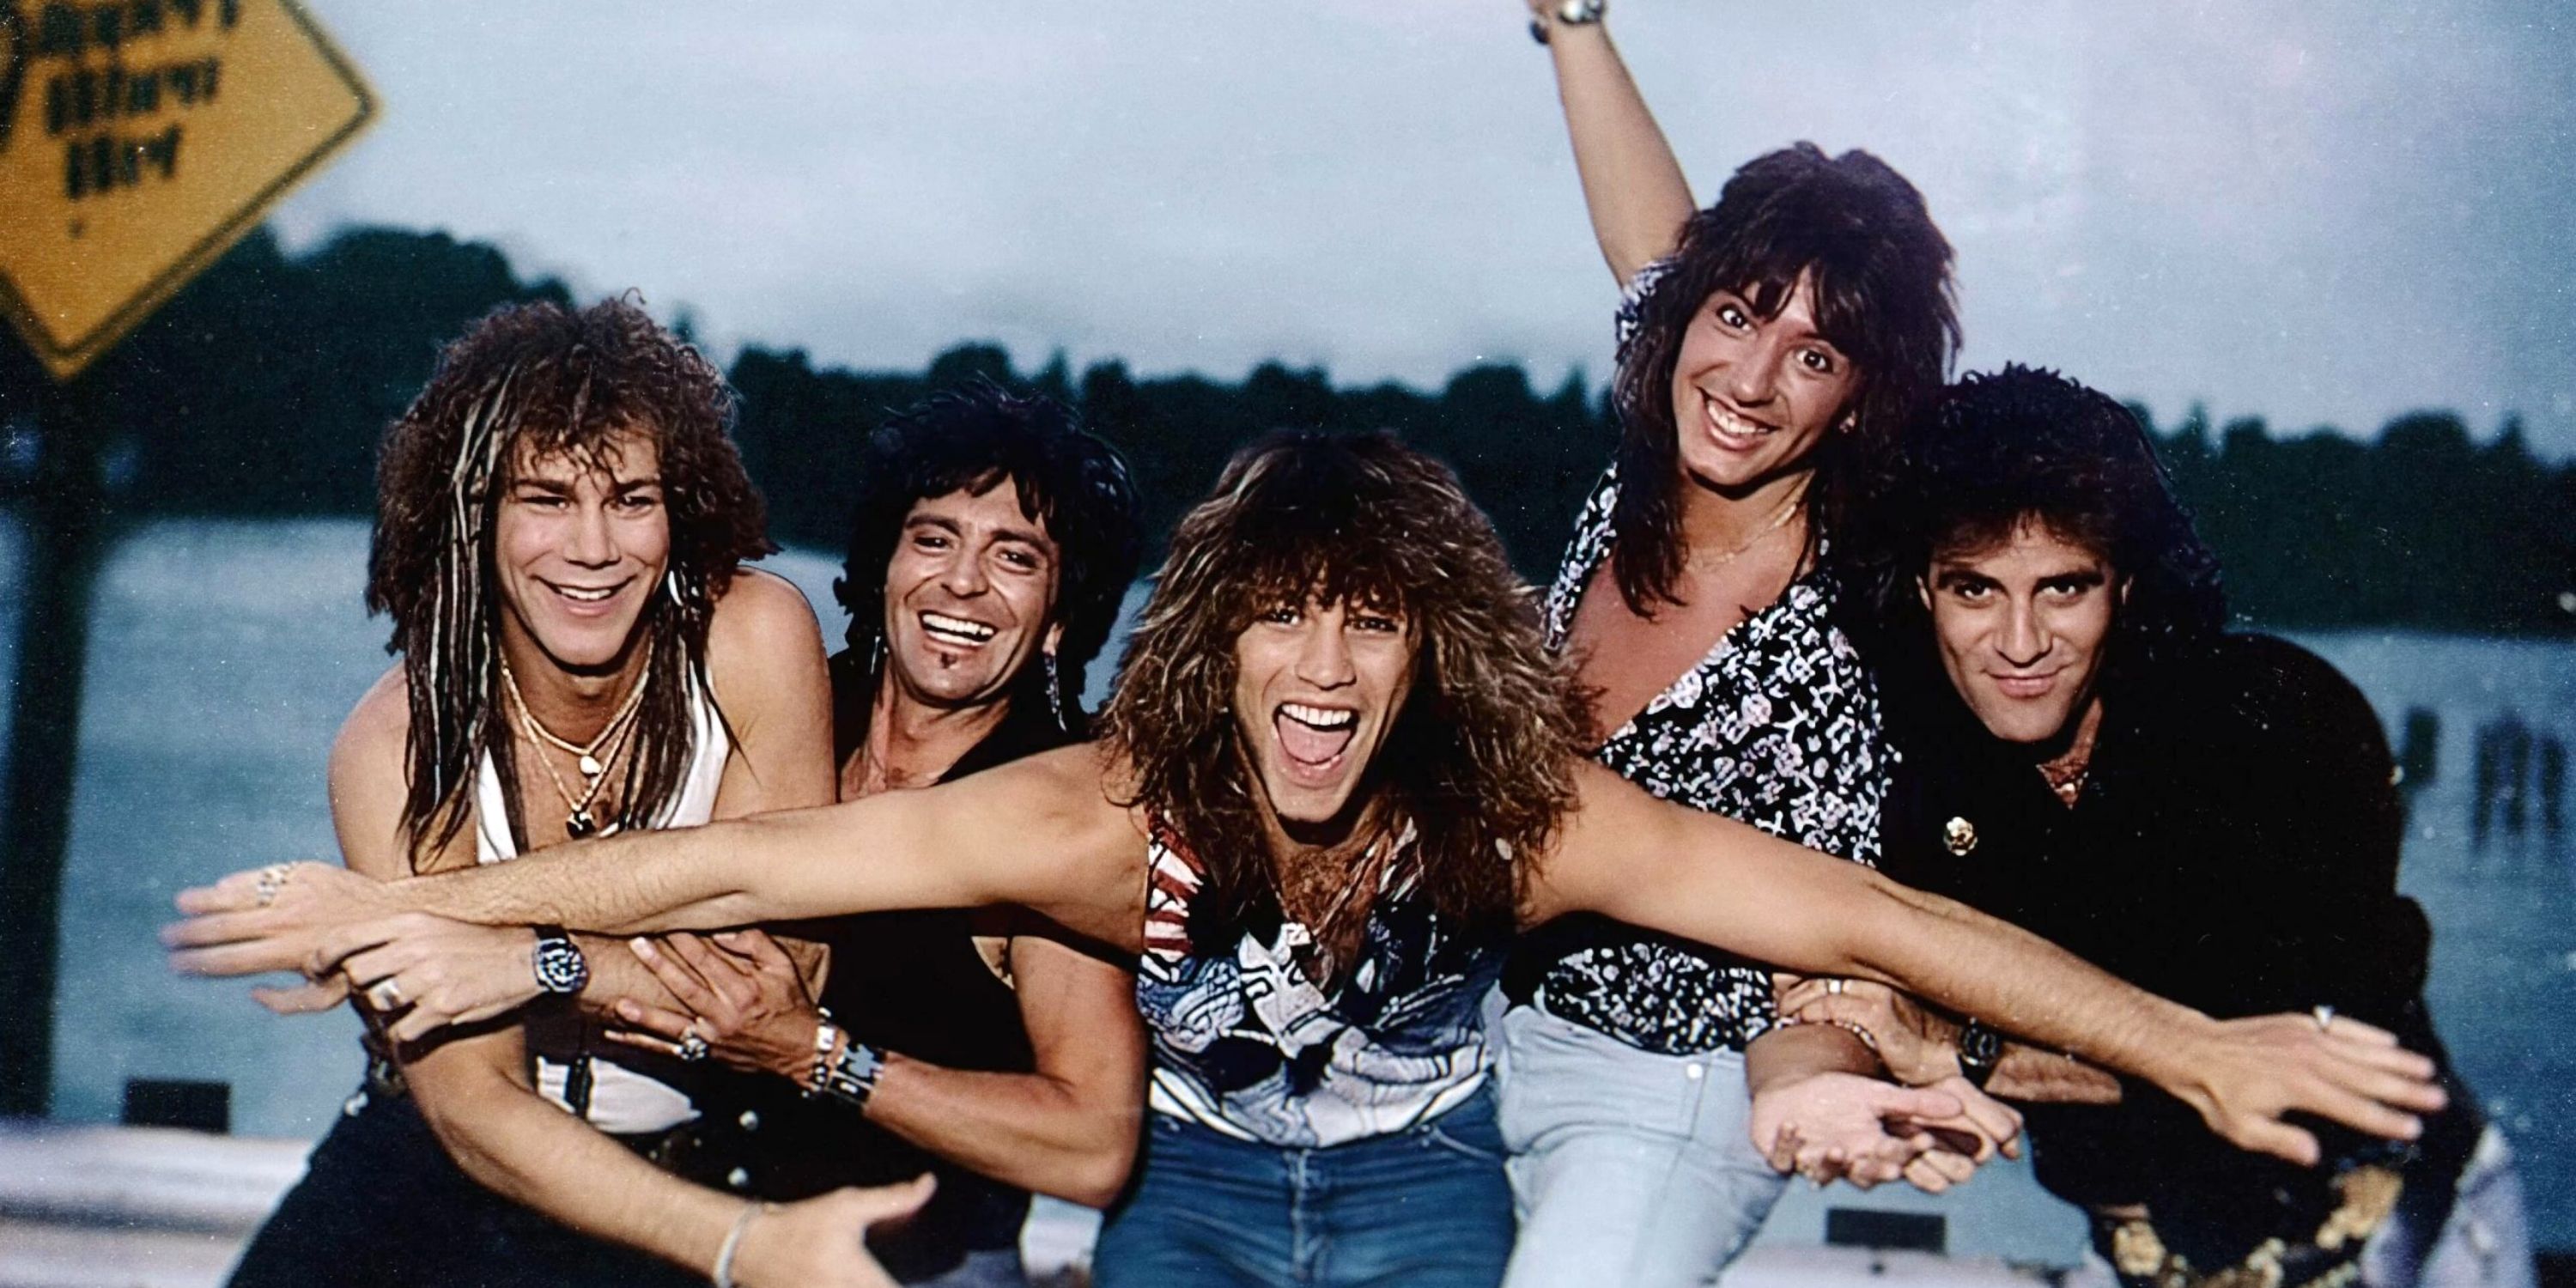 Bon Jovi in a retro promo photo with Jon Bon Jovi in the middle with his arms out for the doc Thank You, Goodnight